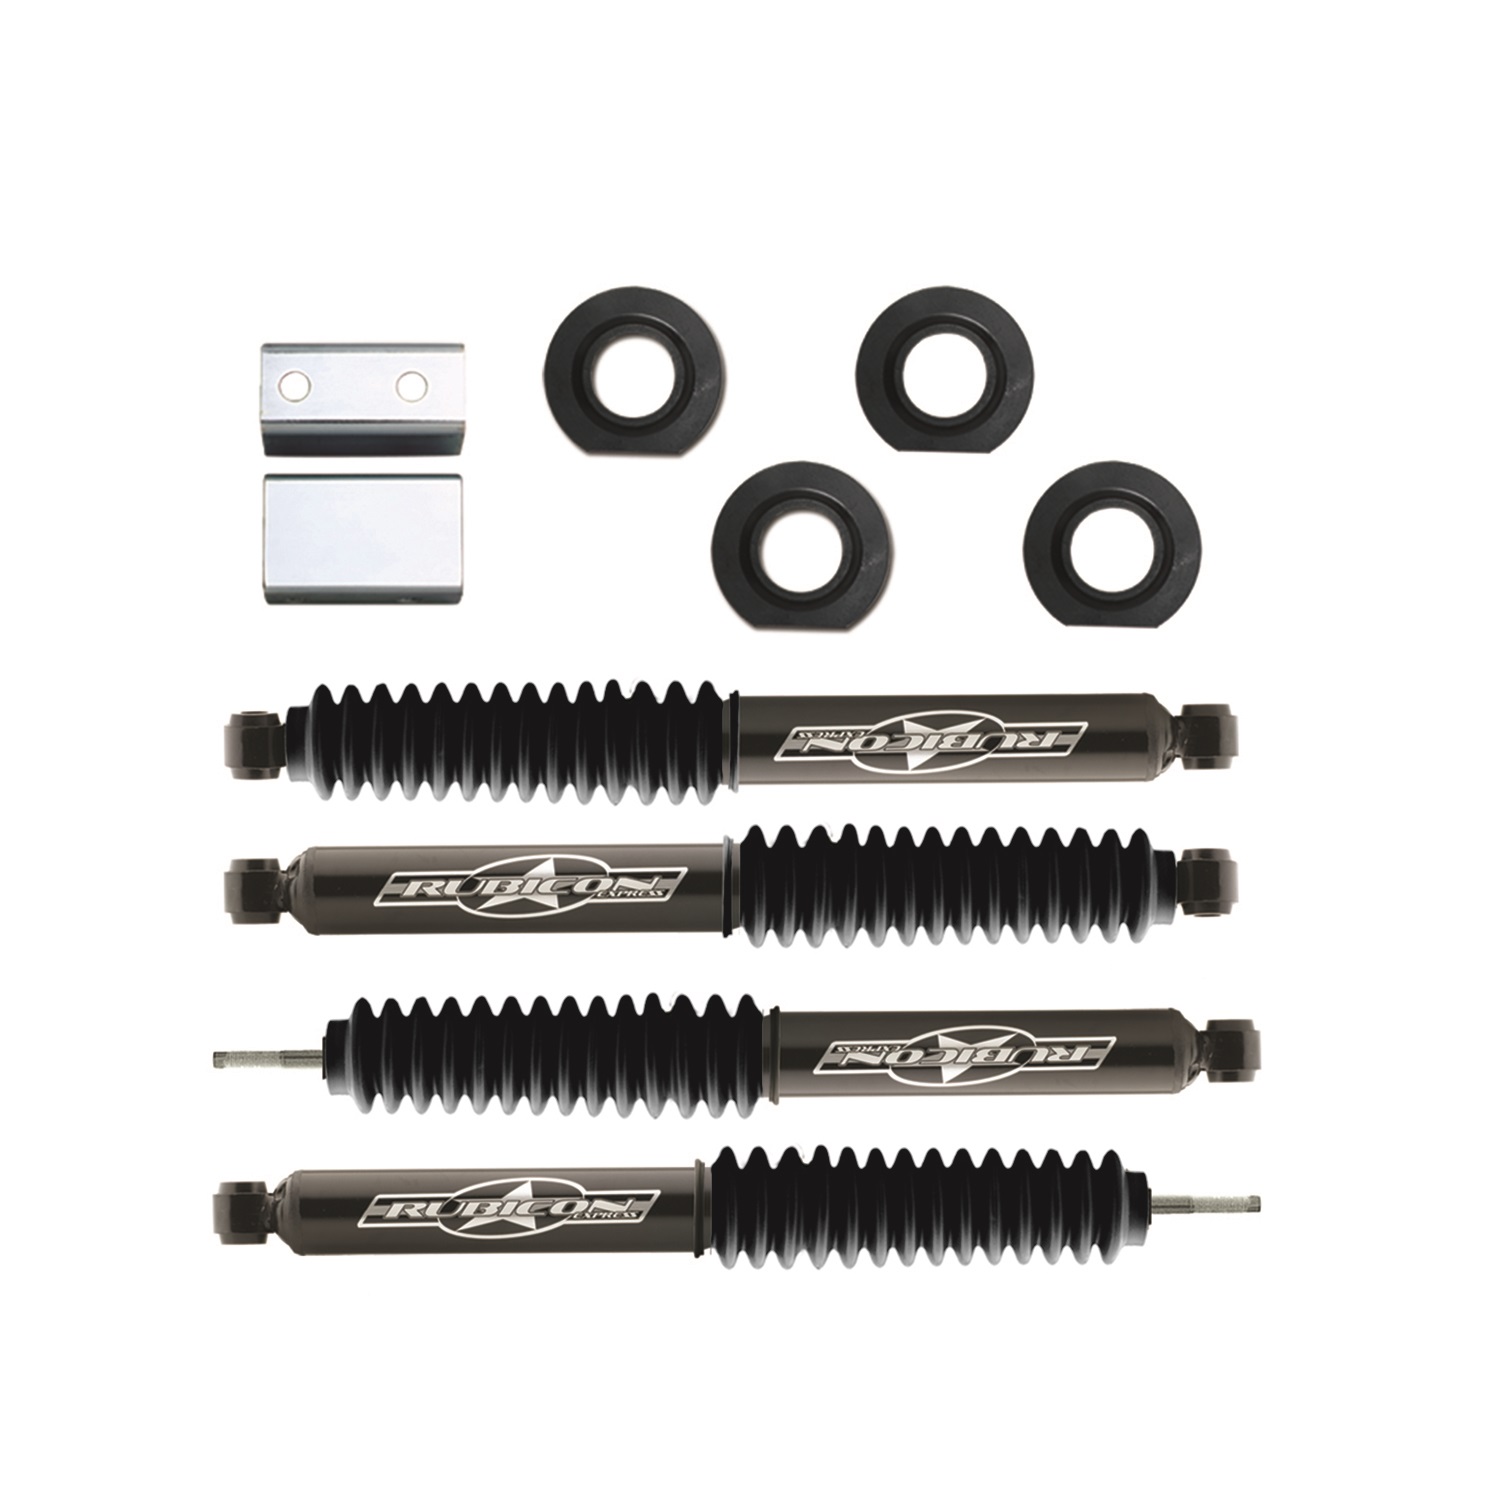 Rubicon Express Rubicon Express RE8030 Spacer Lift System w/Shock Fits 93-98 Grand Cherokee (ZJ)